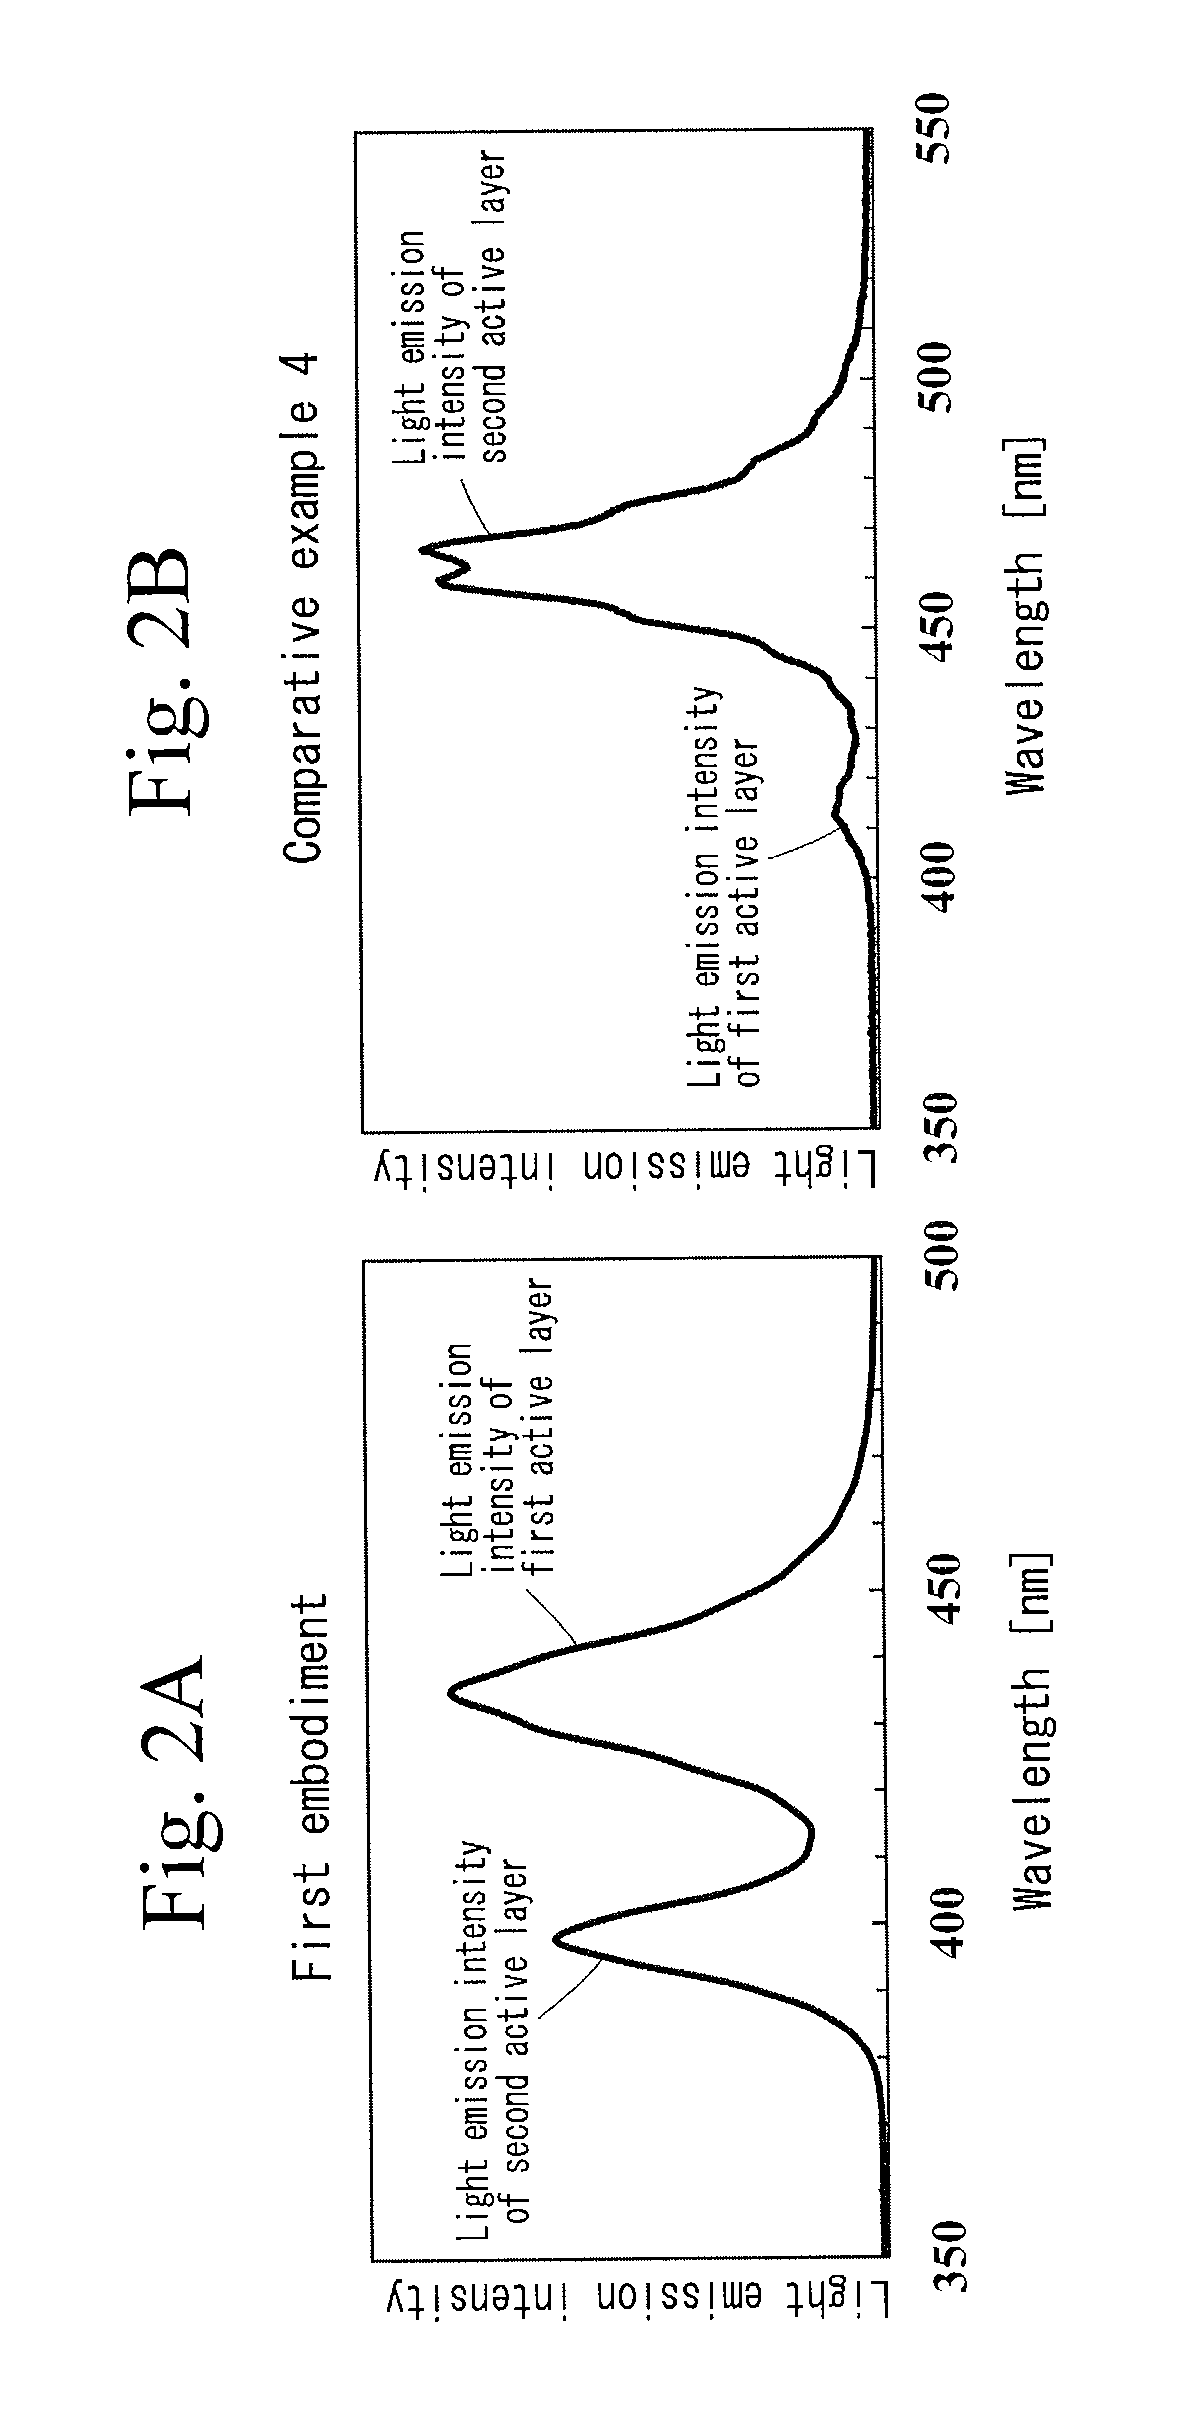 Nitride semiconductor light-emitting device with periodic gain active layers